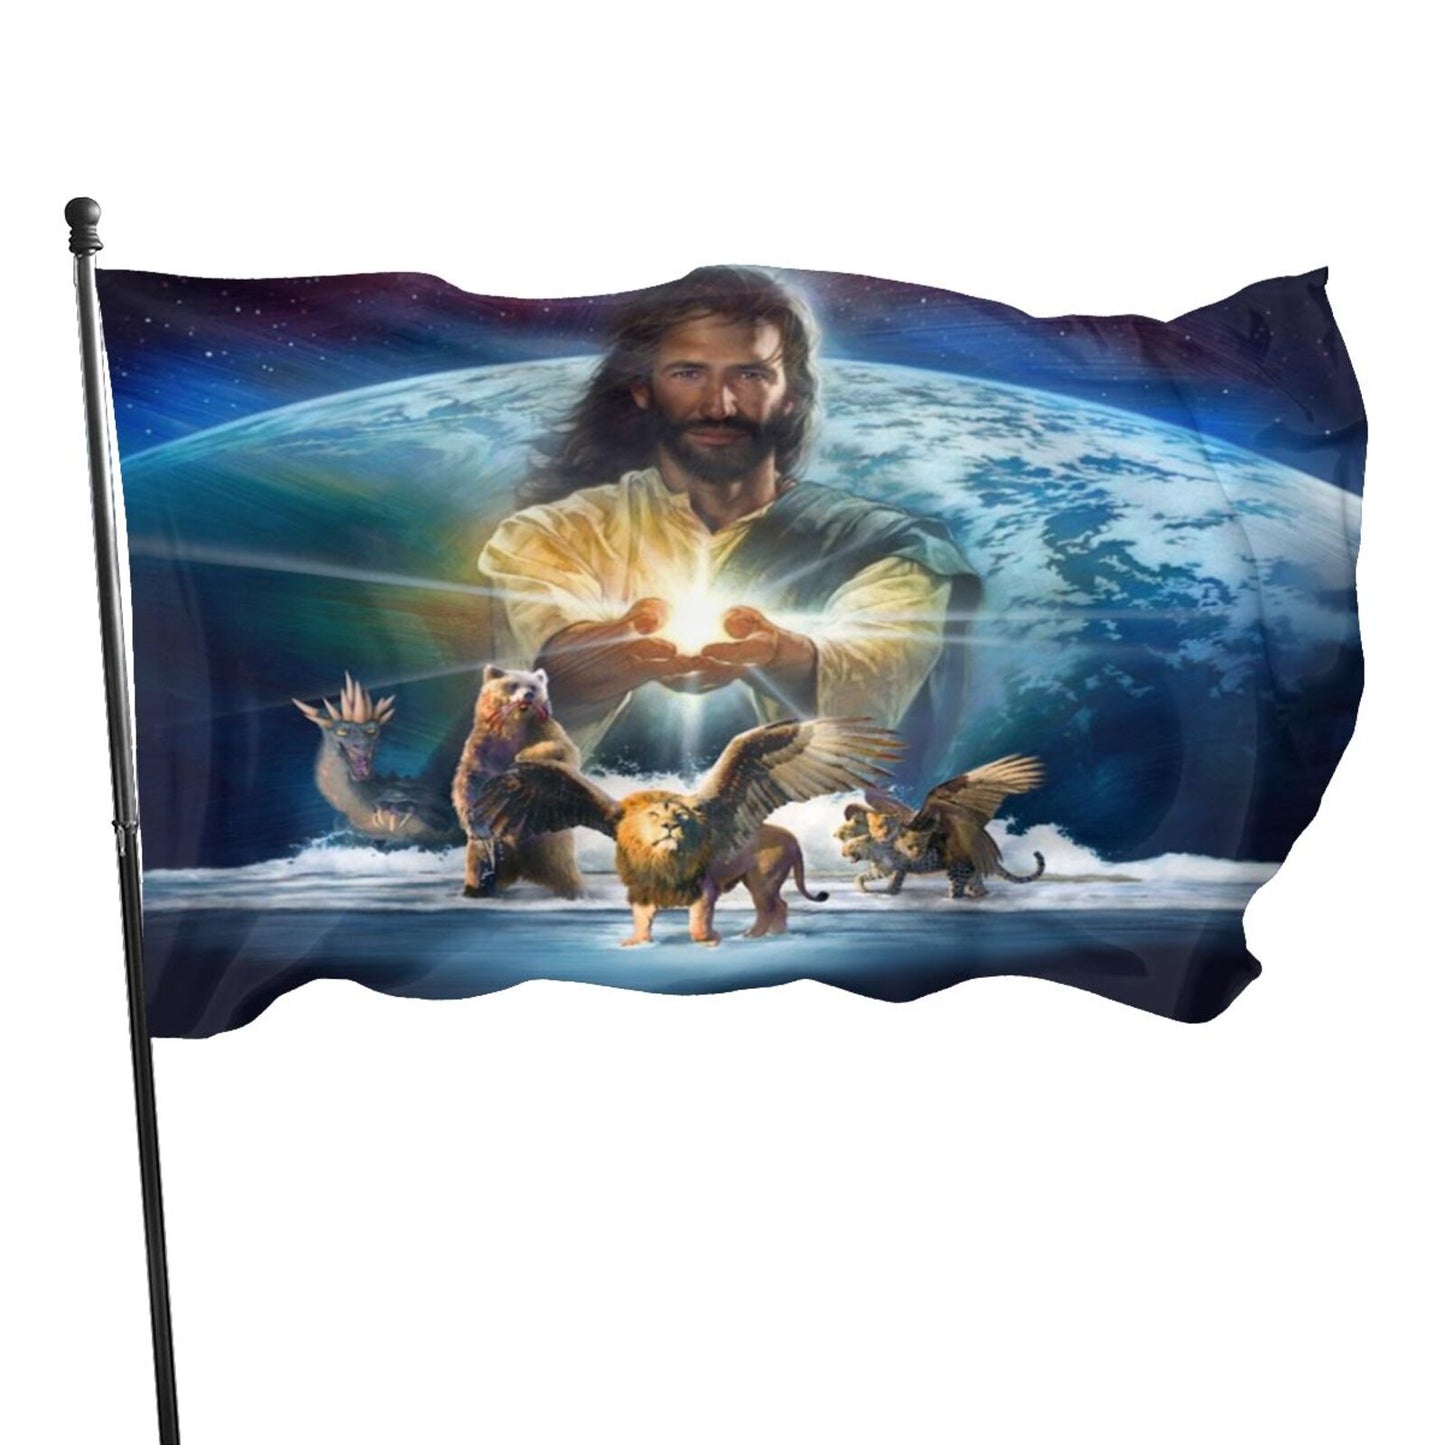 Christianartbag Flag Decor, Christianity JESUS Flag Home Room Dormitory Decoration Outdoor Decor Polyester Banners and Flags Brass Grommets Women Men Gift - Christian Art Bag